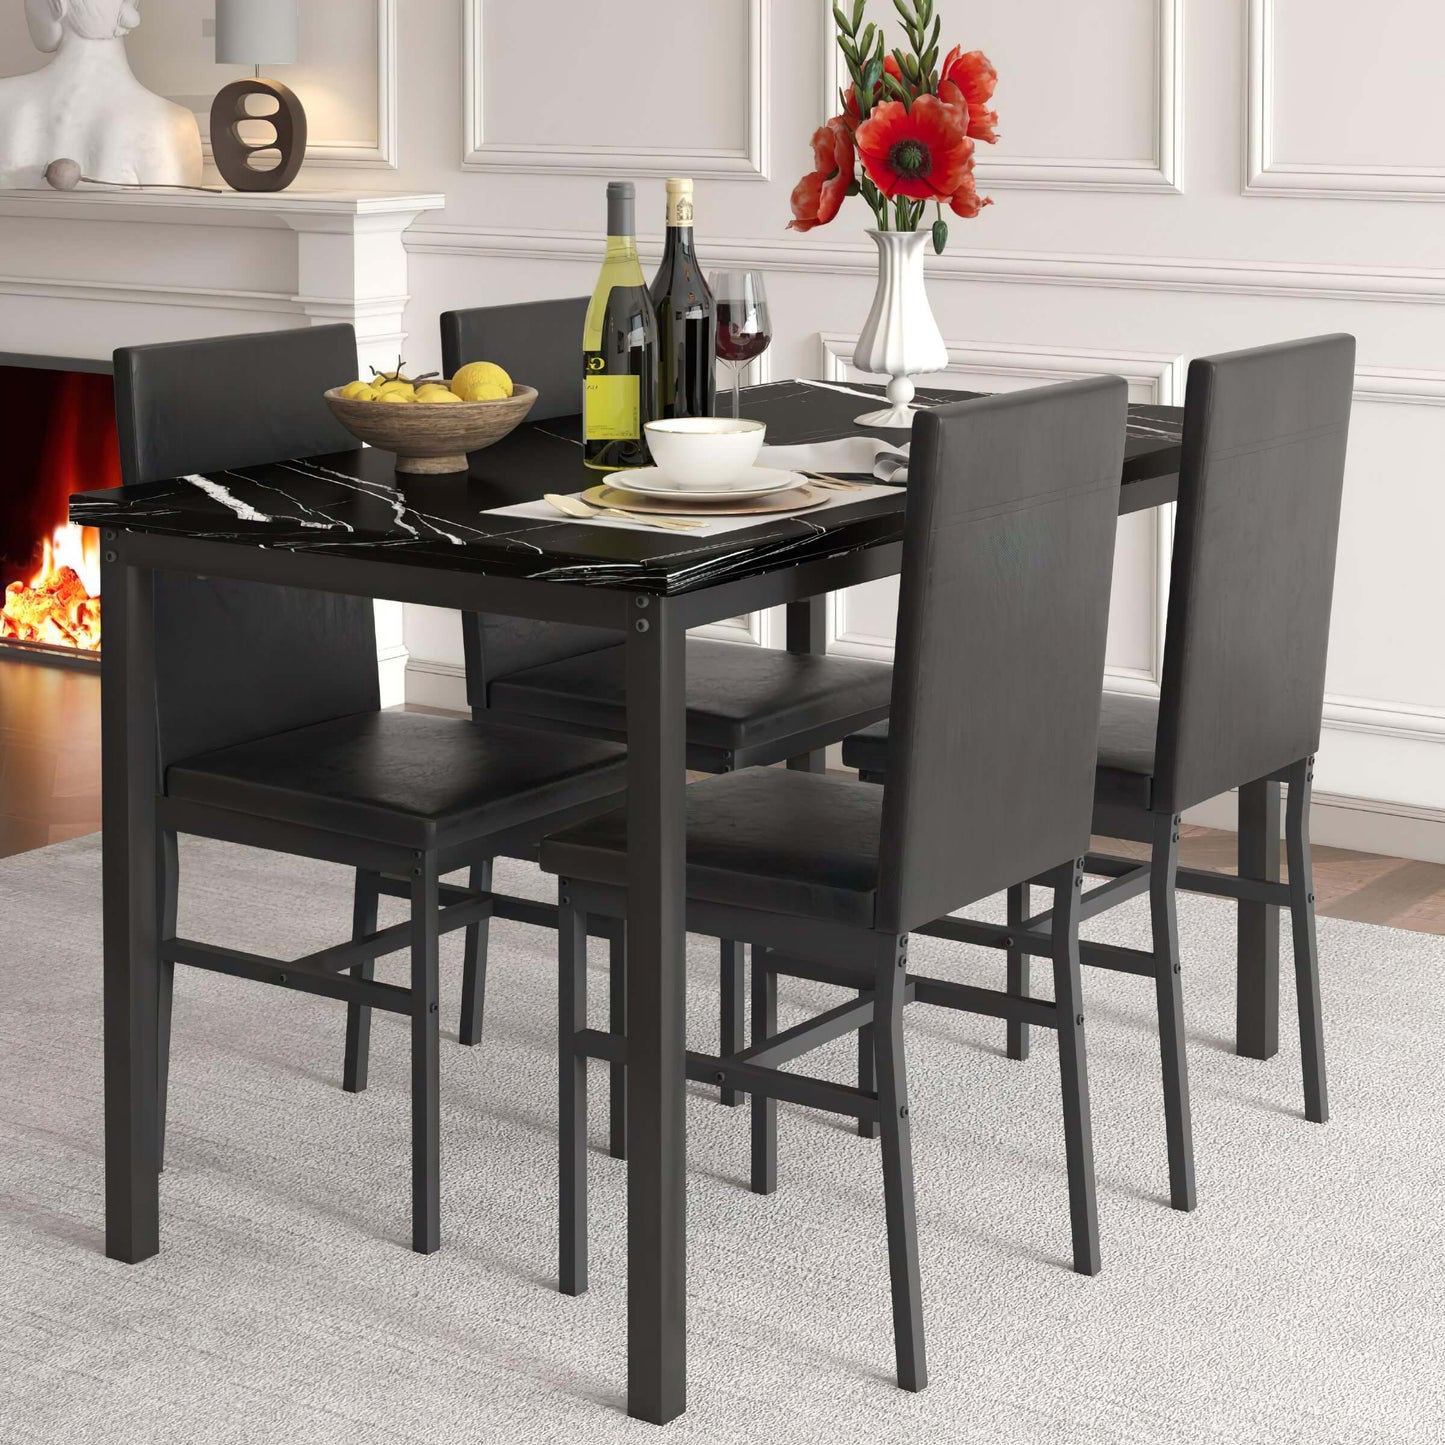 Enchanting WETA 5 Piece Dining Table Set: Contemporary Faux Marble Tabletop with 4 PU Leather Upholstered Chairs